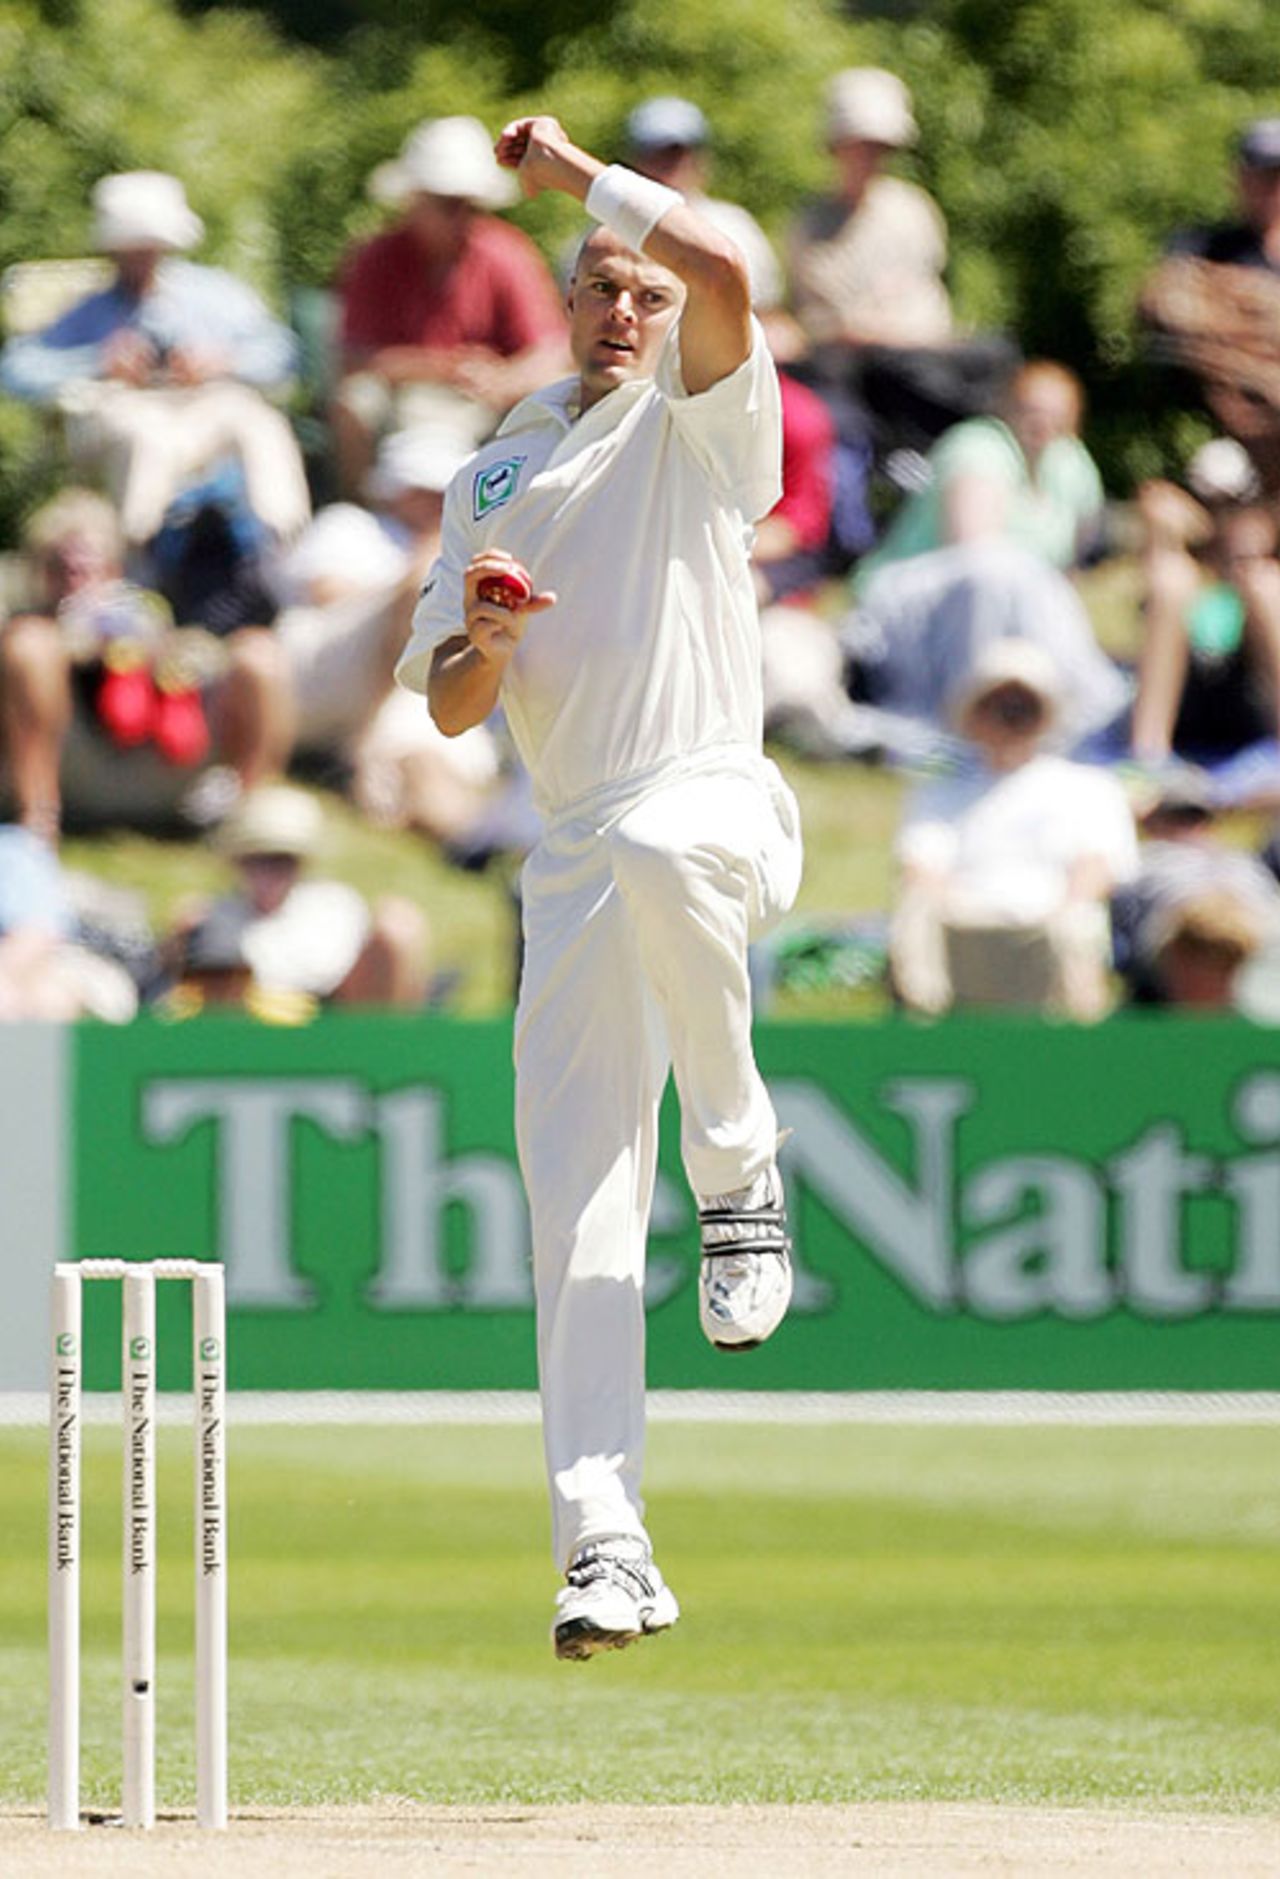 Cold play: Chris Martin bowled well but without any luck, New Zealand v Bangladesh, 1st Test, Dunedin, 2nd day, January 5, 2008